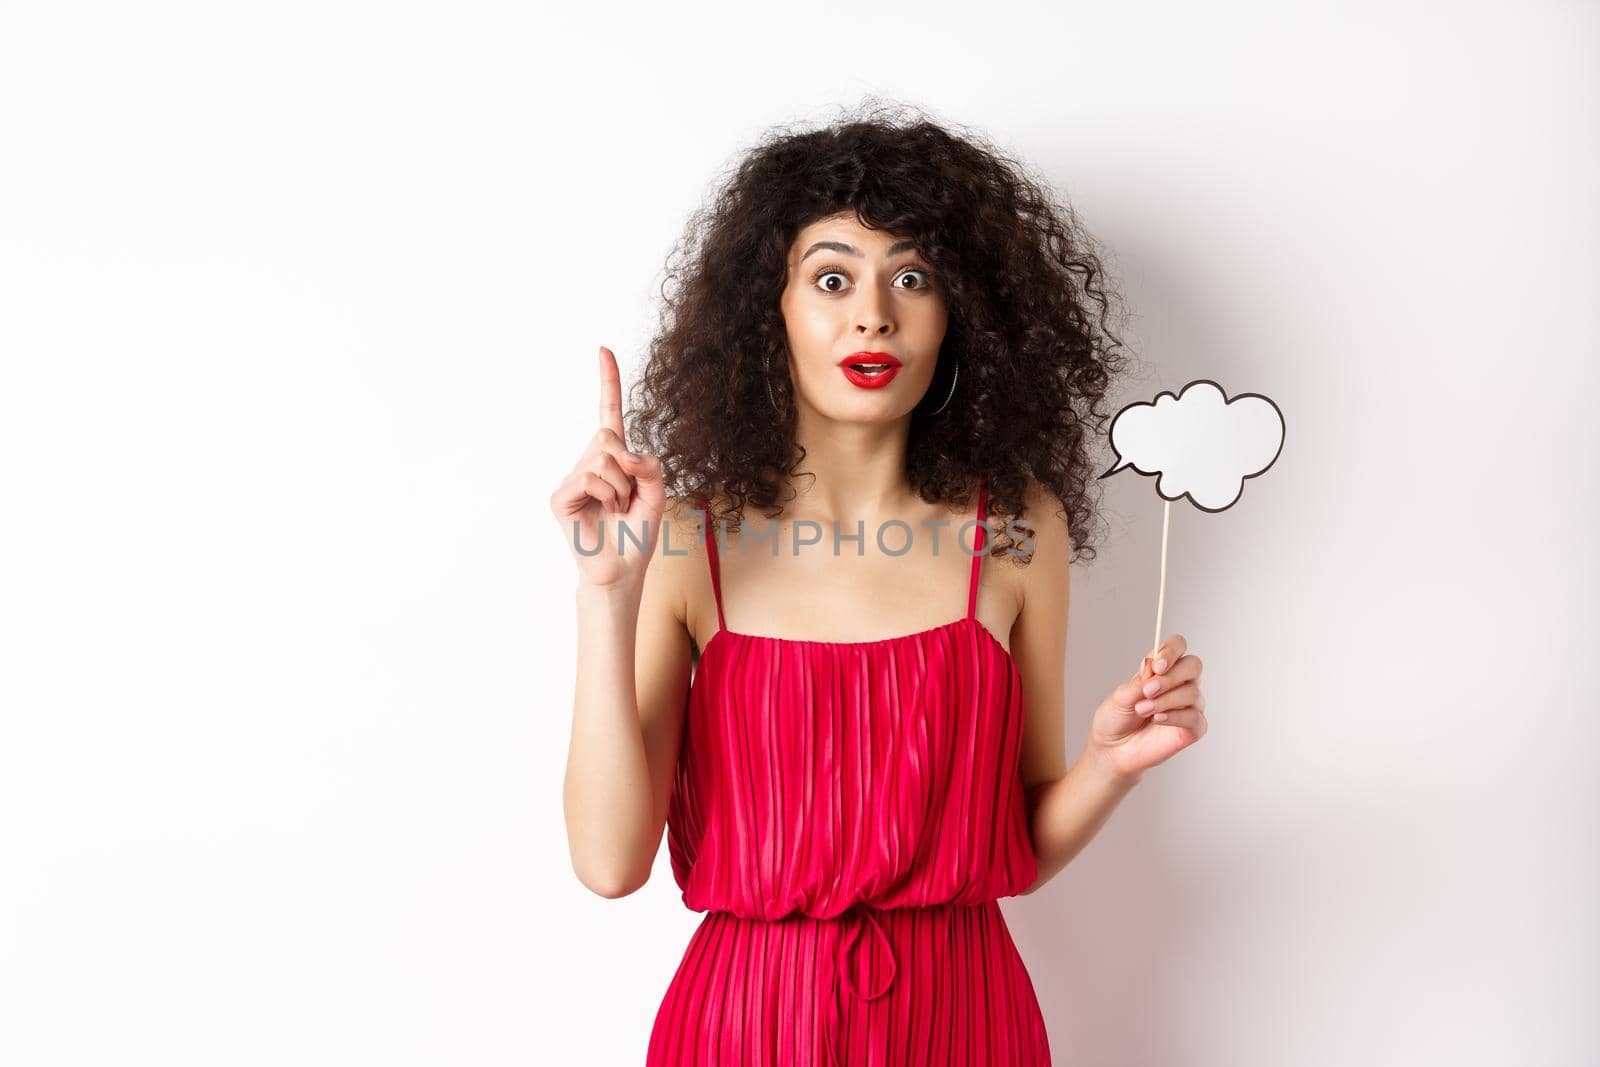 Cute caucasian lady in red dress, holding comment cloud and raising finger, pitching an idea and smiling, suggesting something, standing over white background.